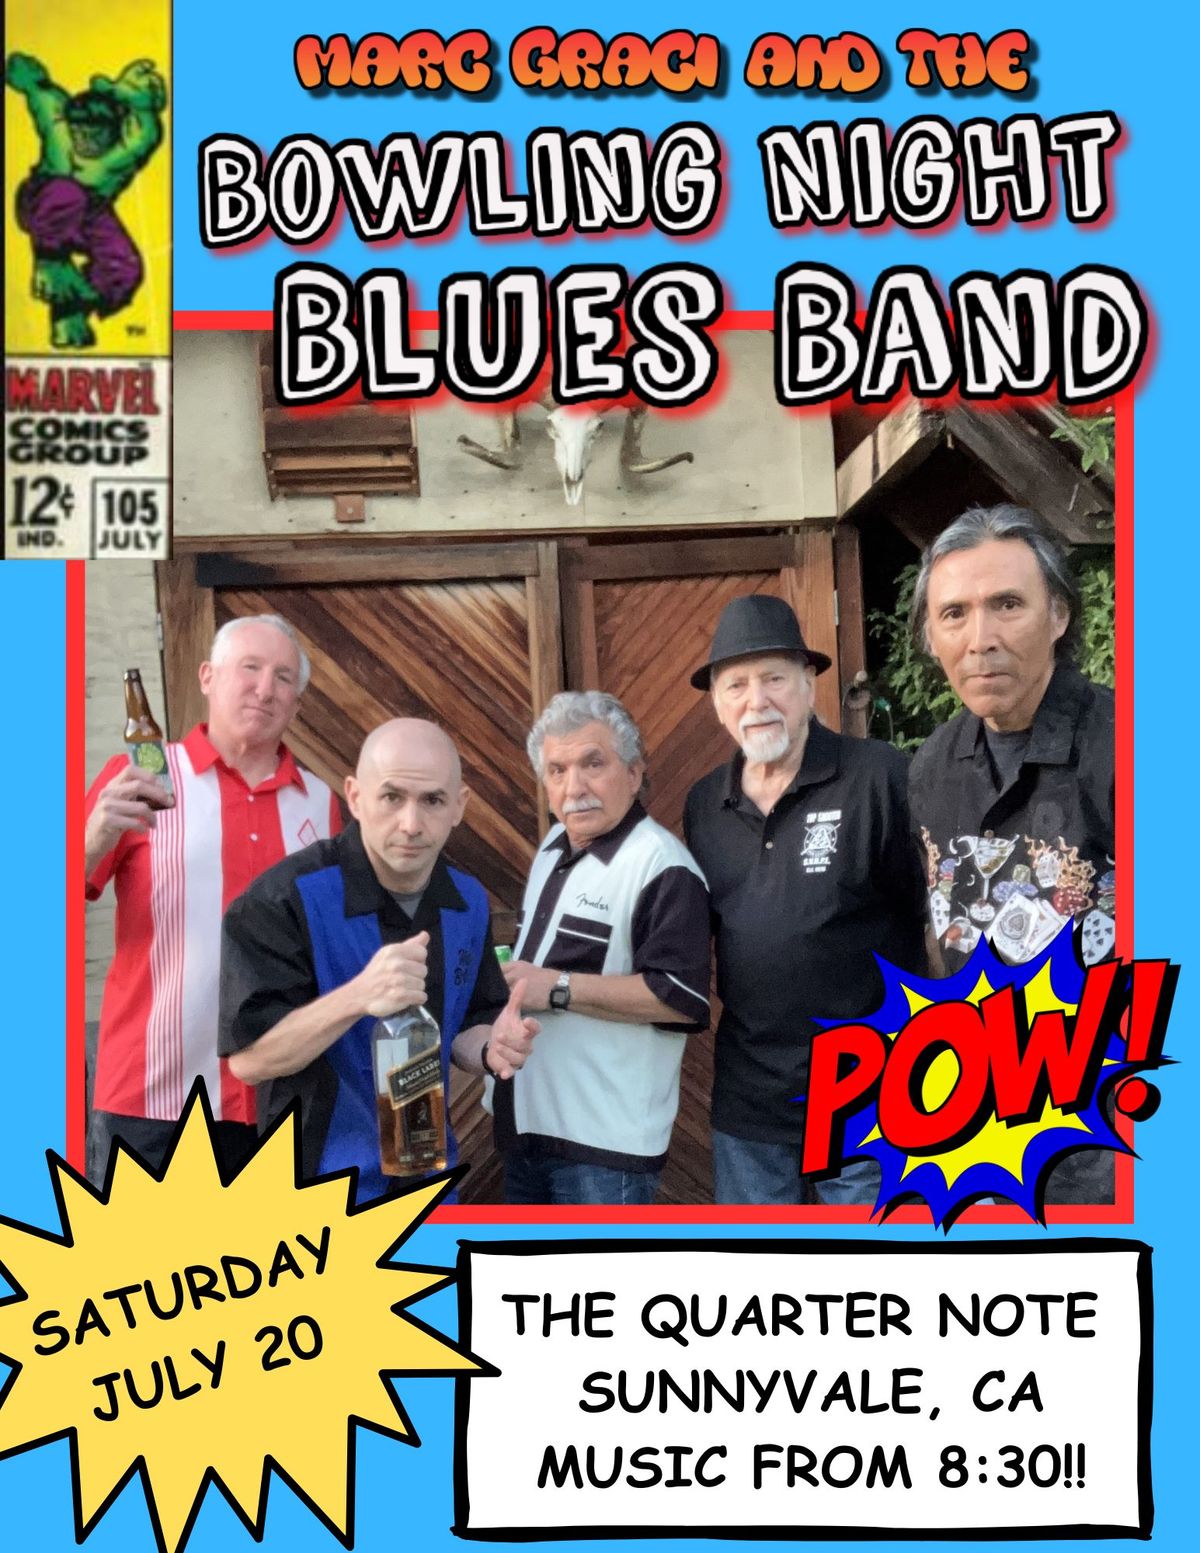 The Bowling Night Blues Band at The Quarter Note